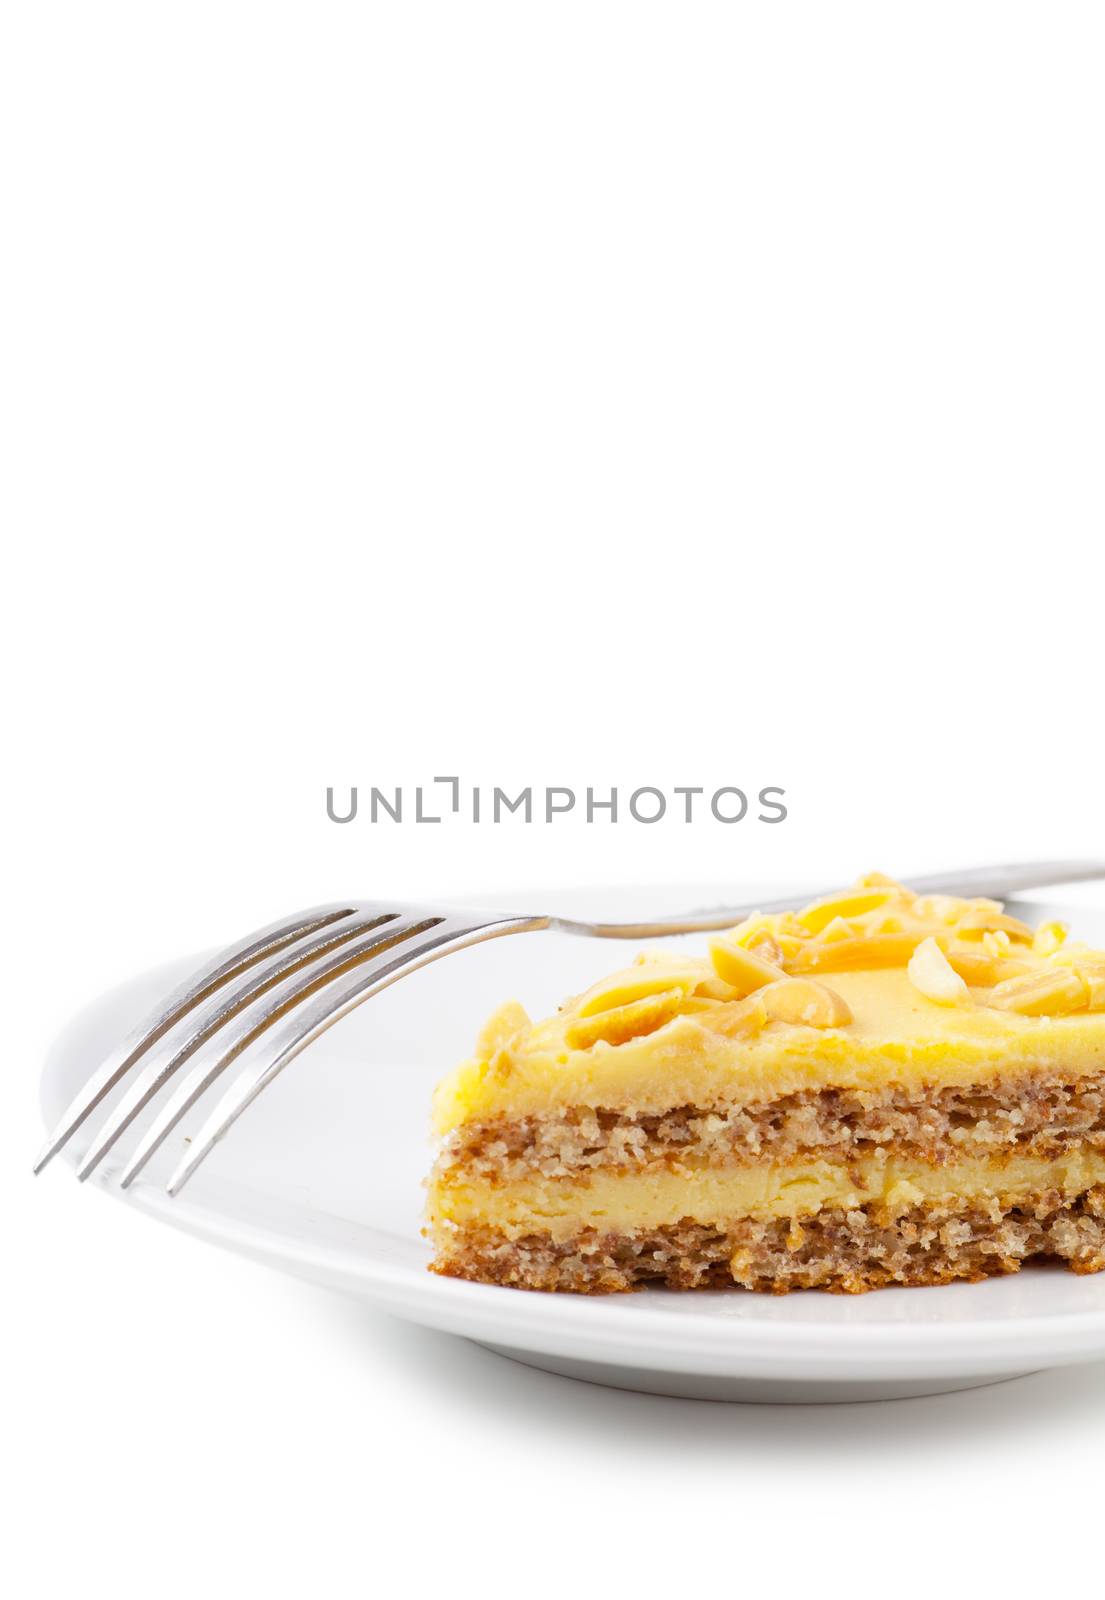 Closeup view of piece of sweet pie and fork on a white plate